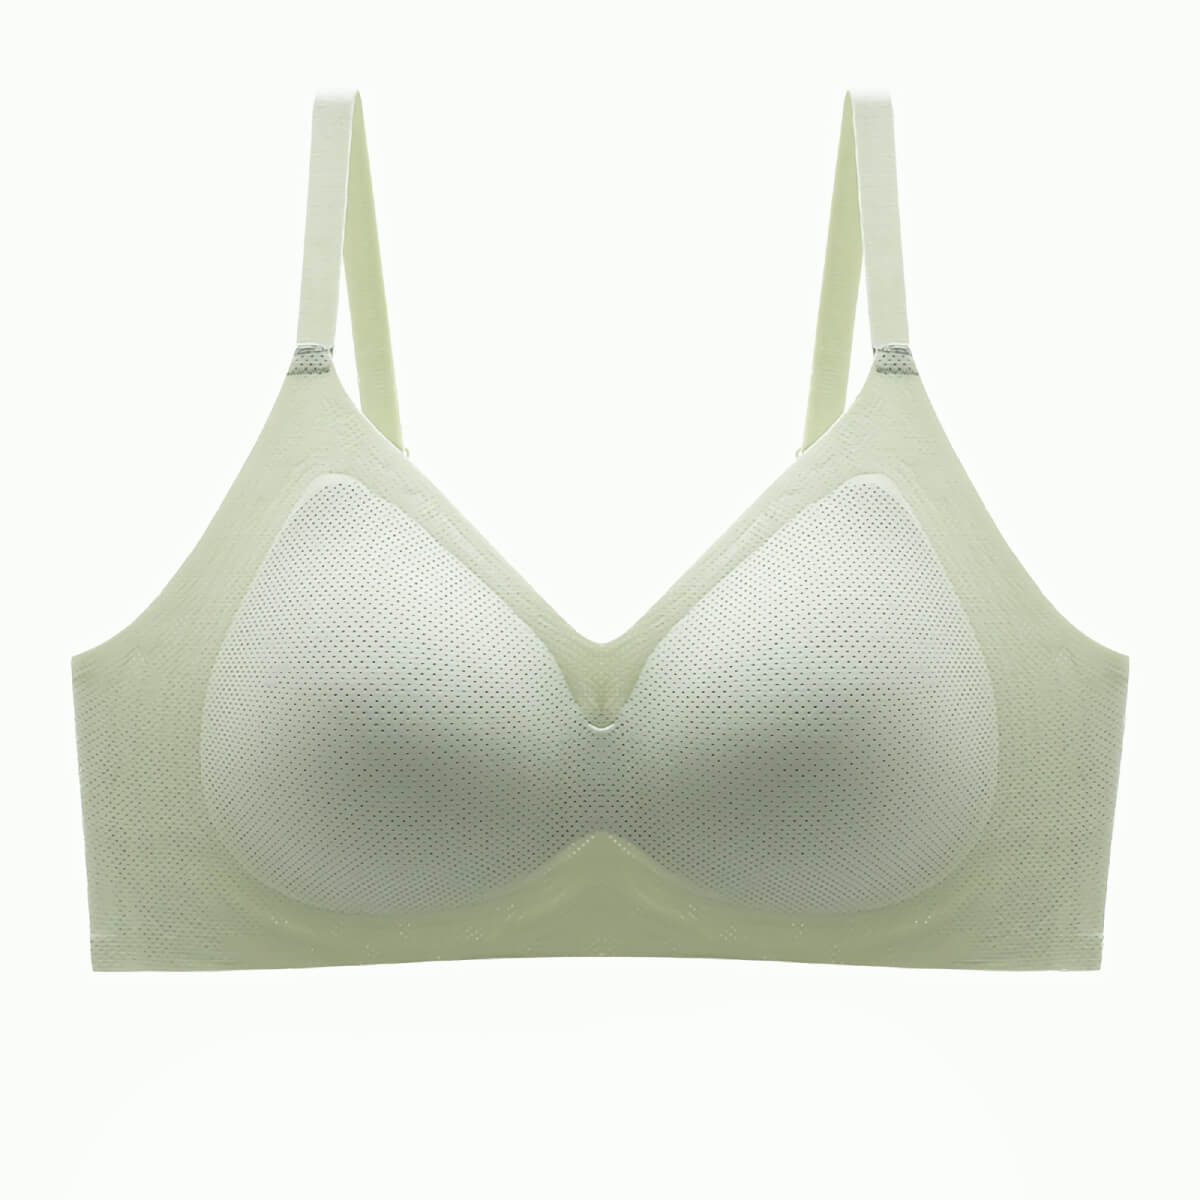 Lightly Lined Bras 32G, Bras for Large Breasts